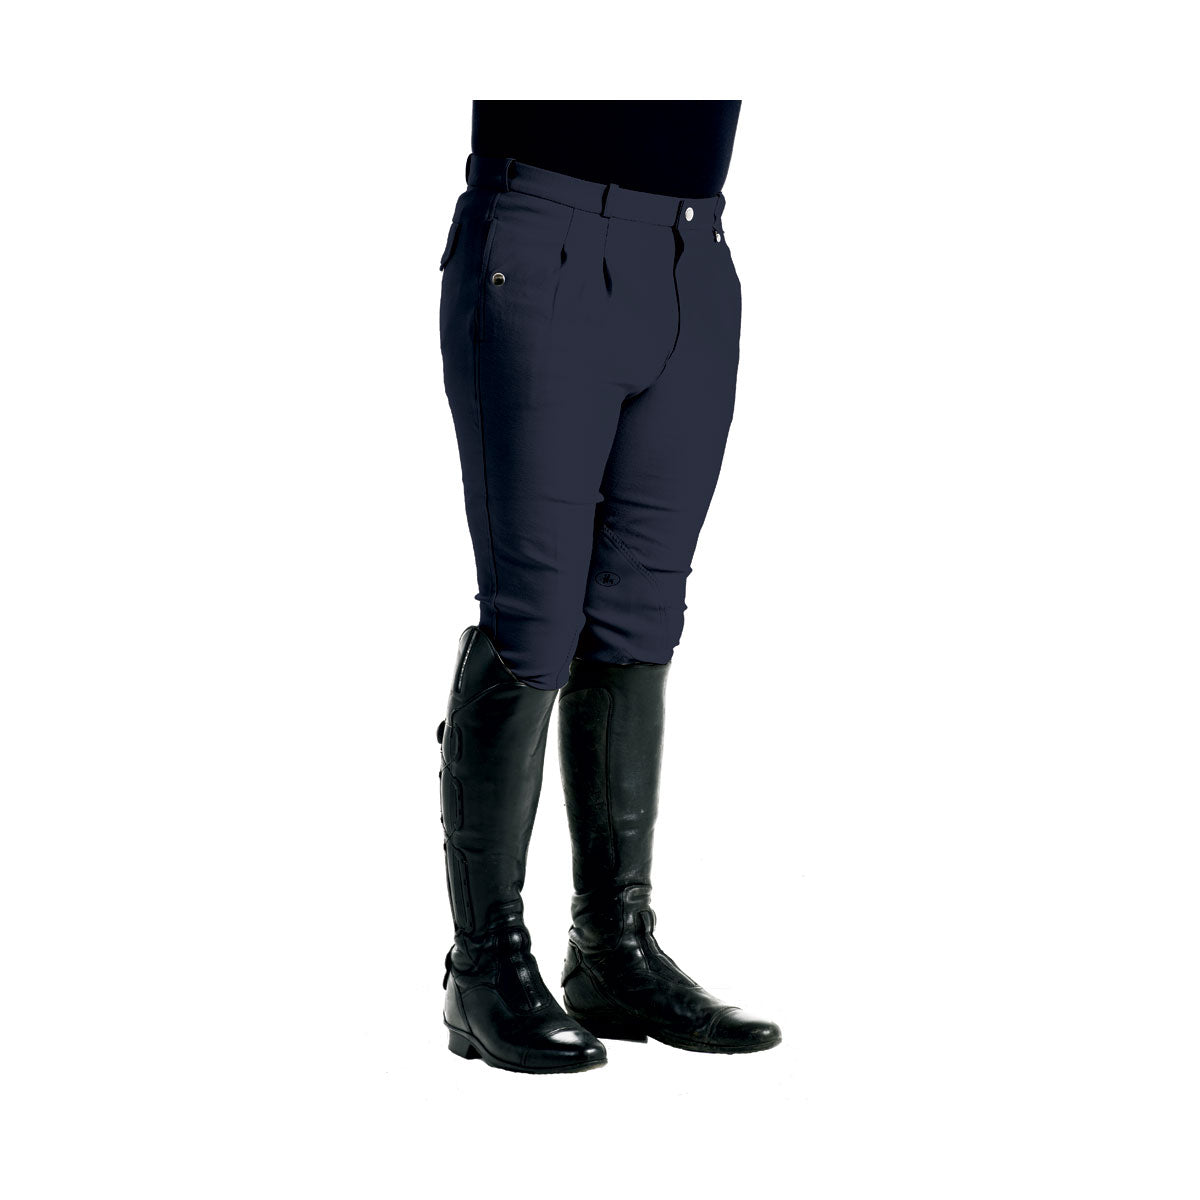 Buy Cavalry Riding Pants Online In India - Etsy India